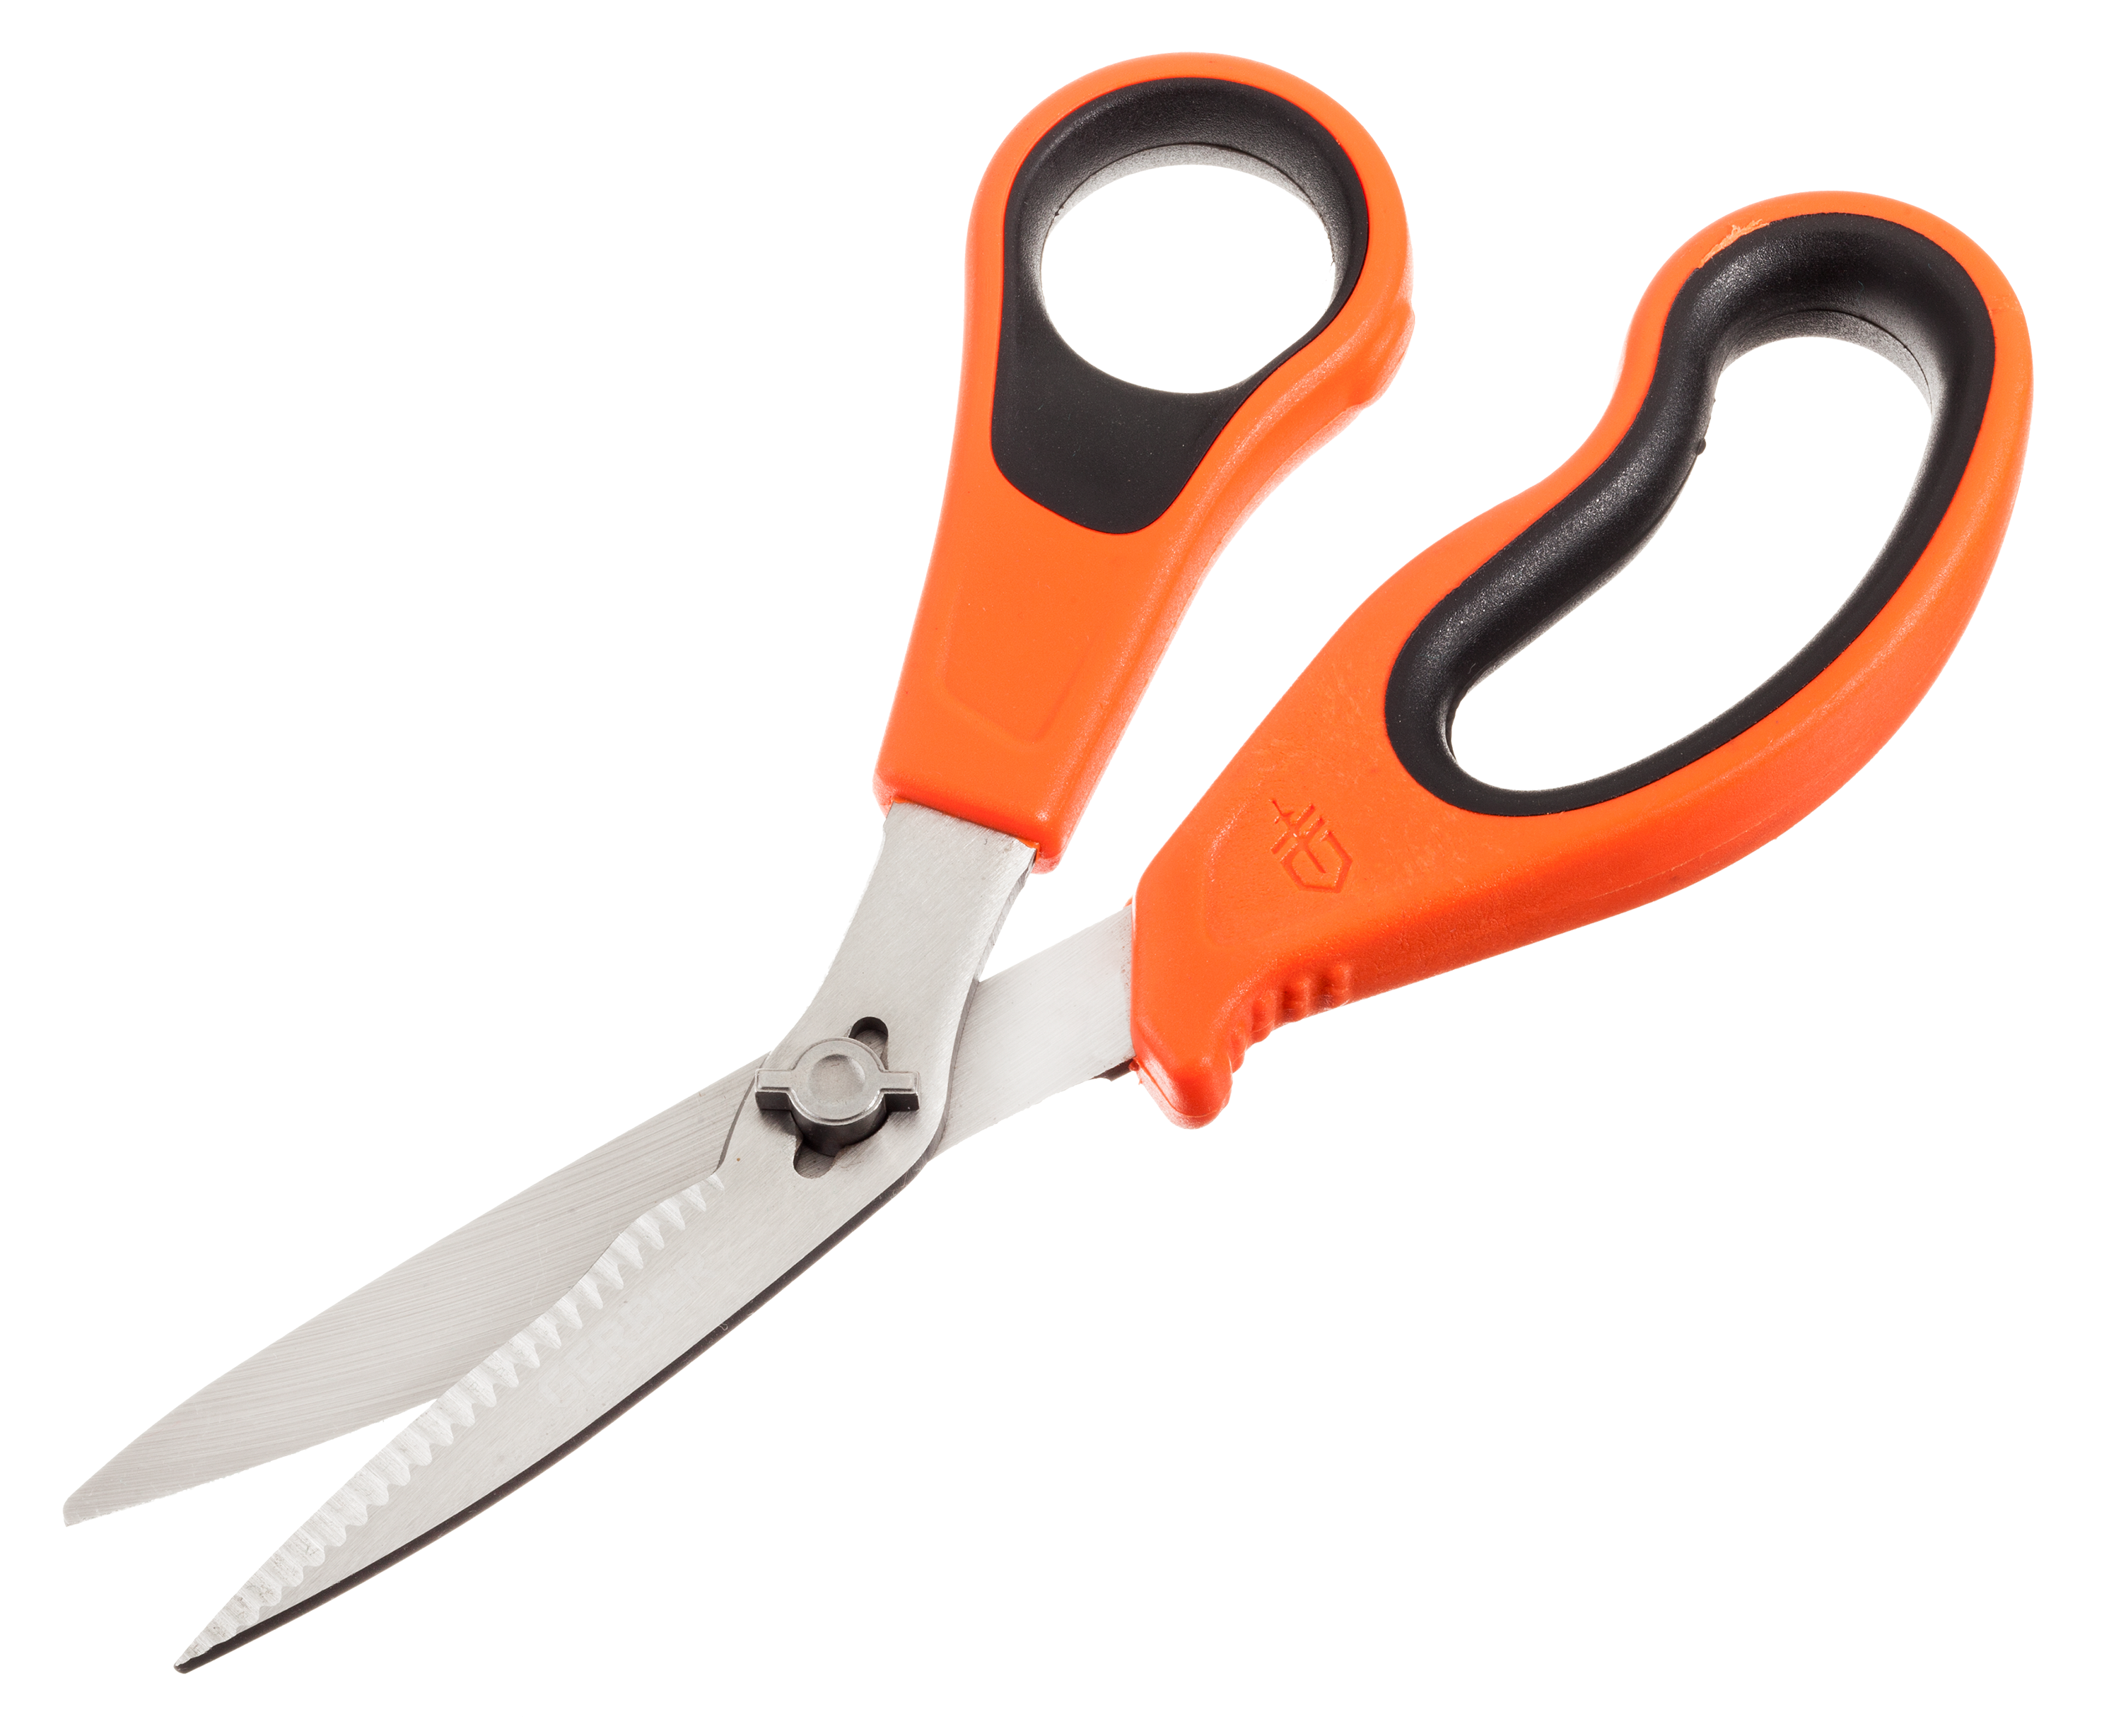 🔥 24 HOURS ONLY, GERBER FISHING SHEARS